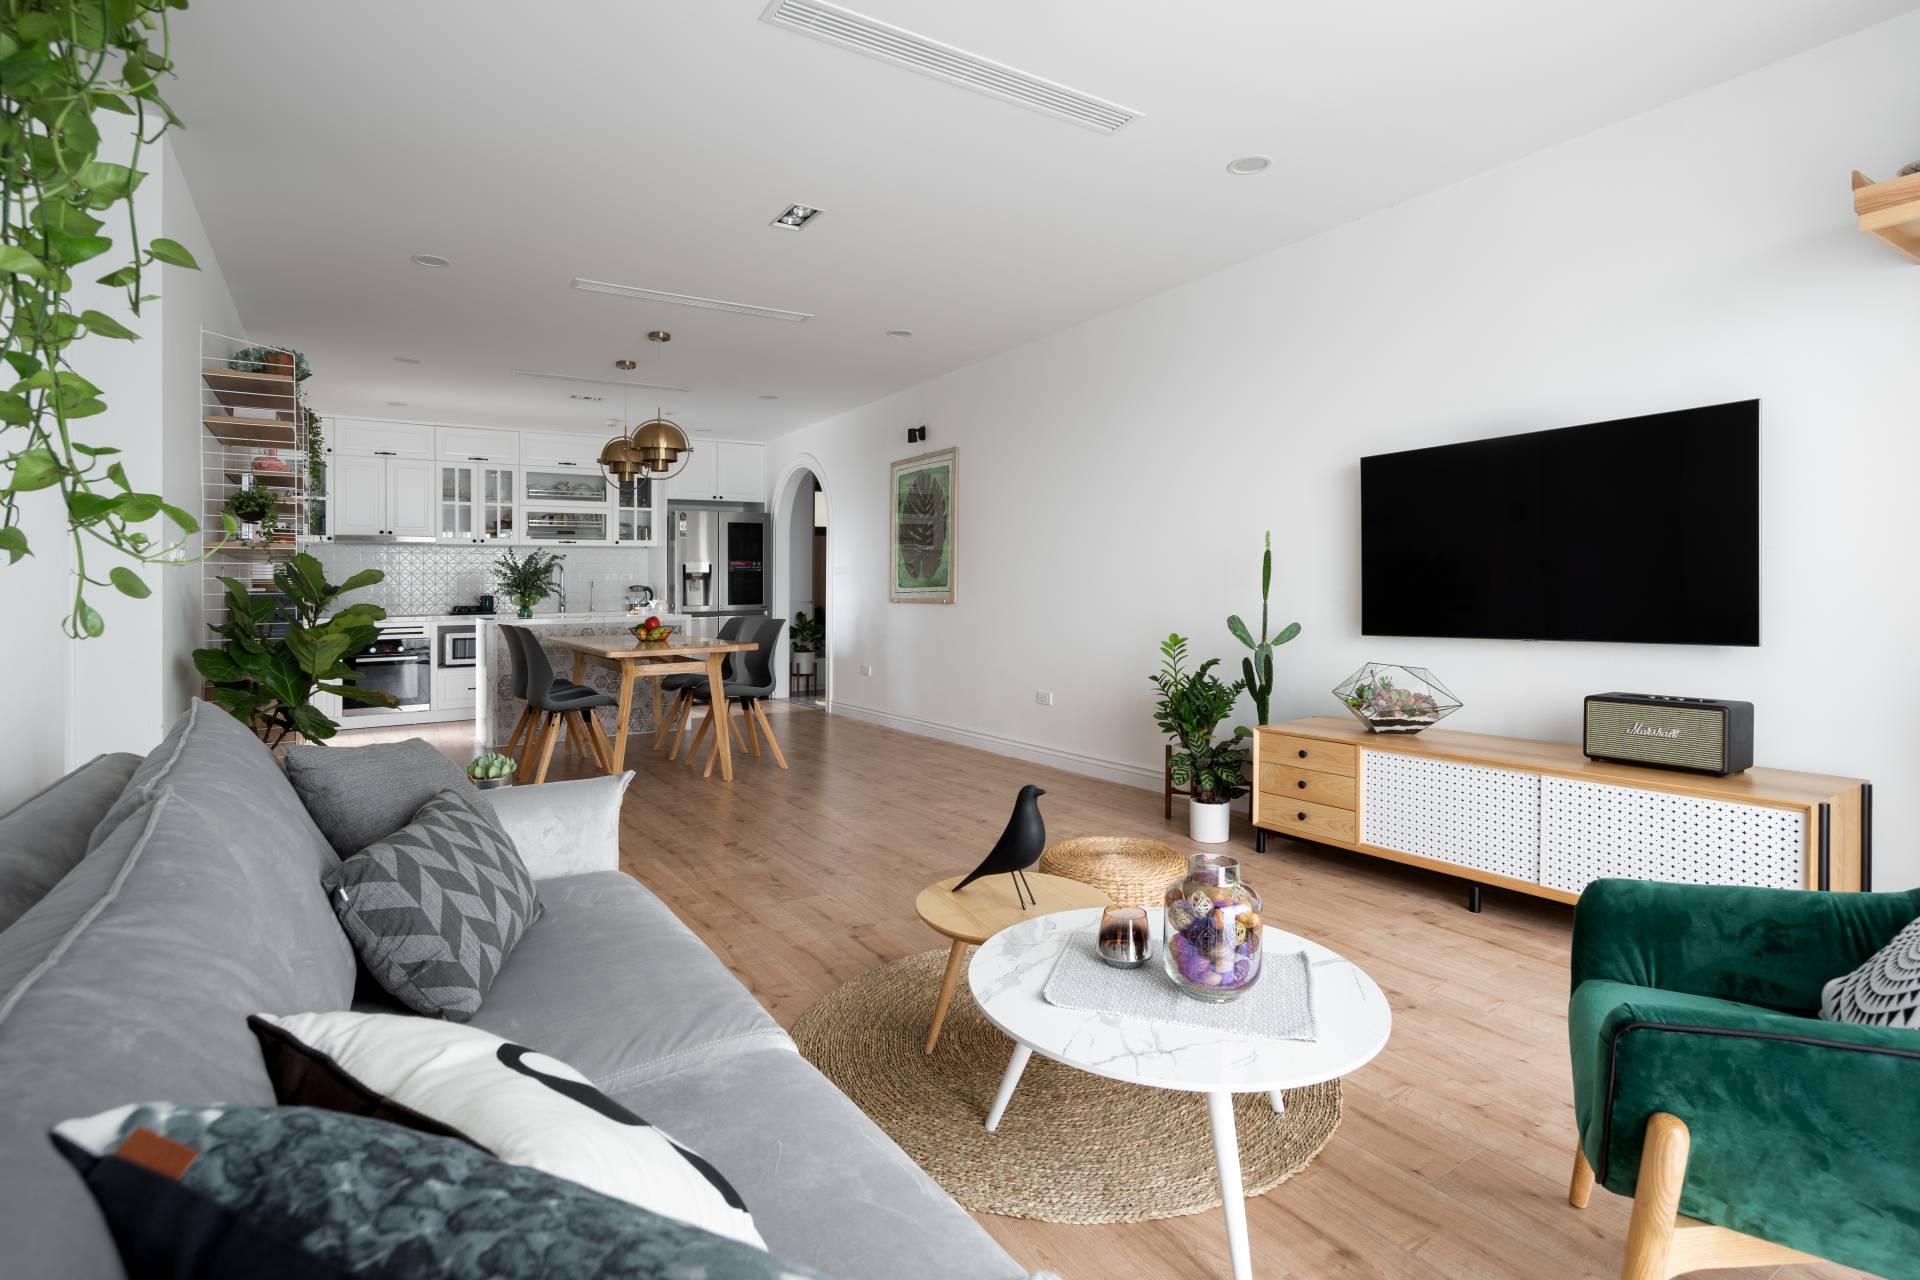 Spacious and airy apartment with Scandinavian design style.